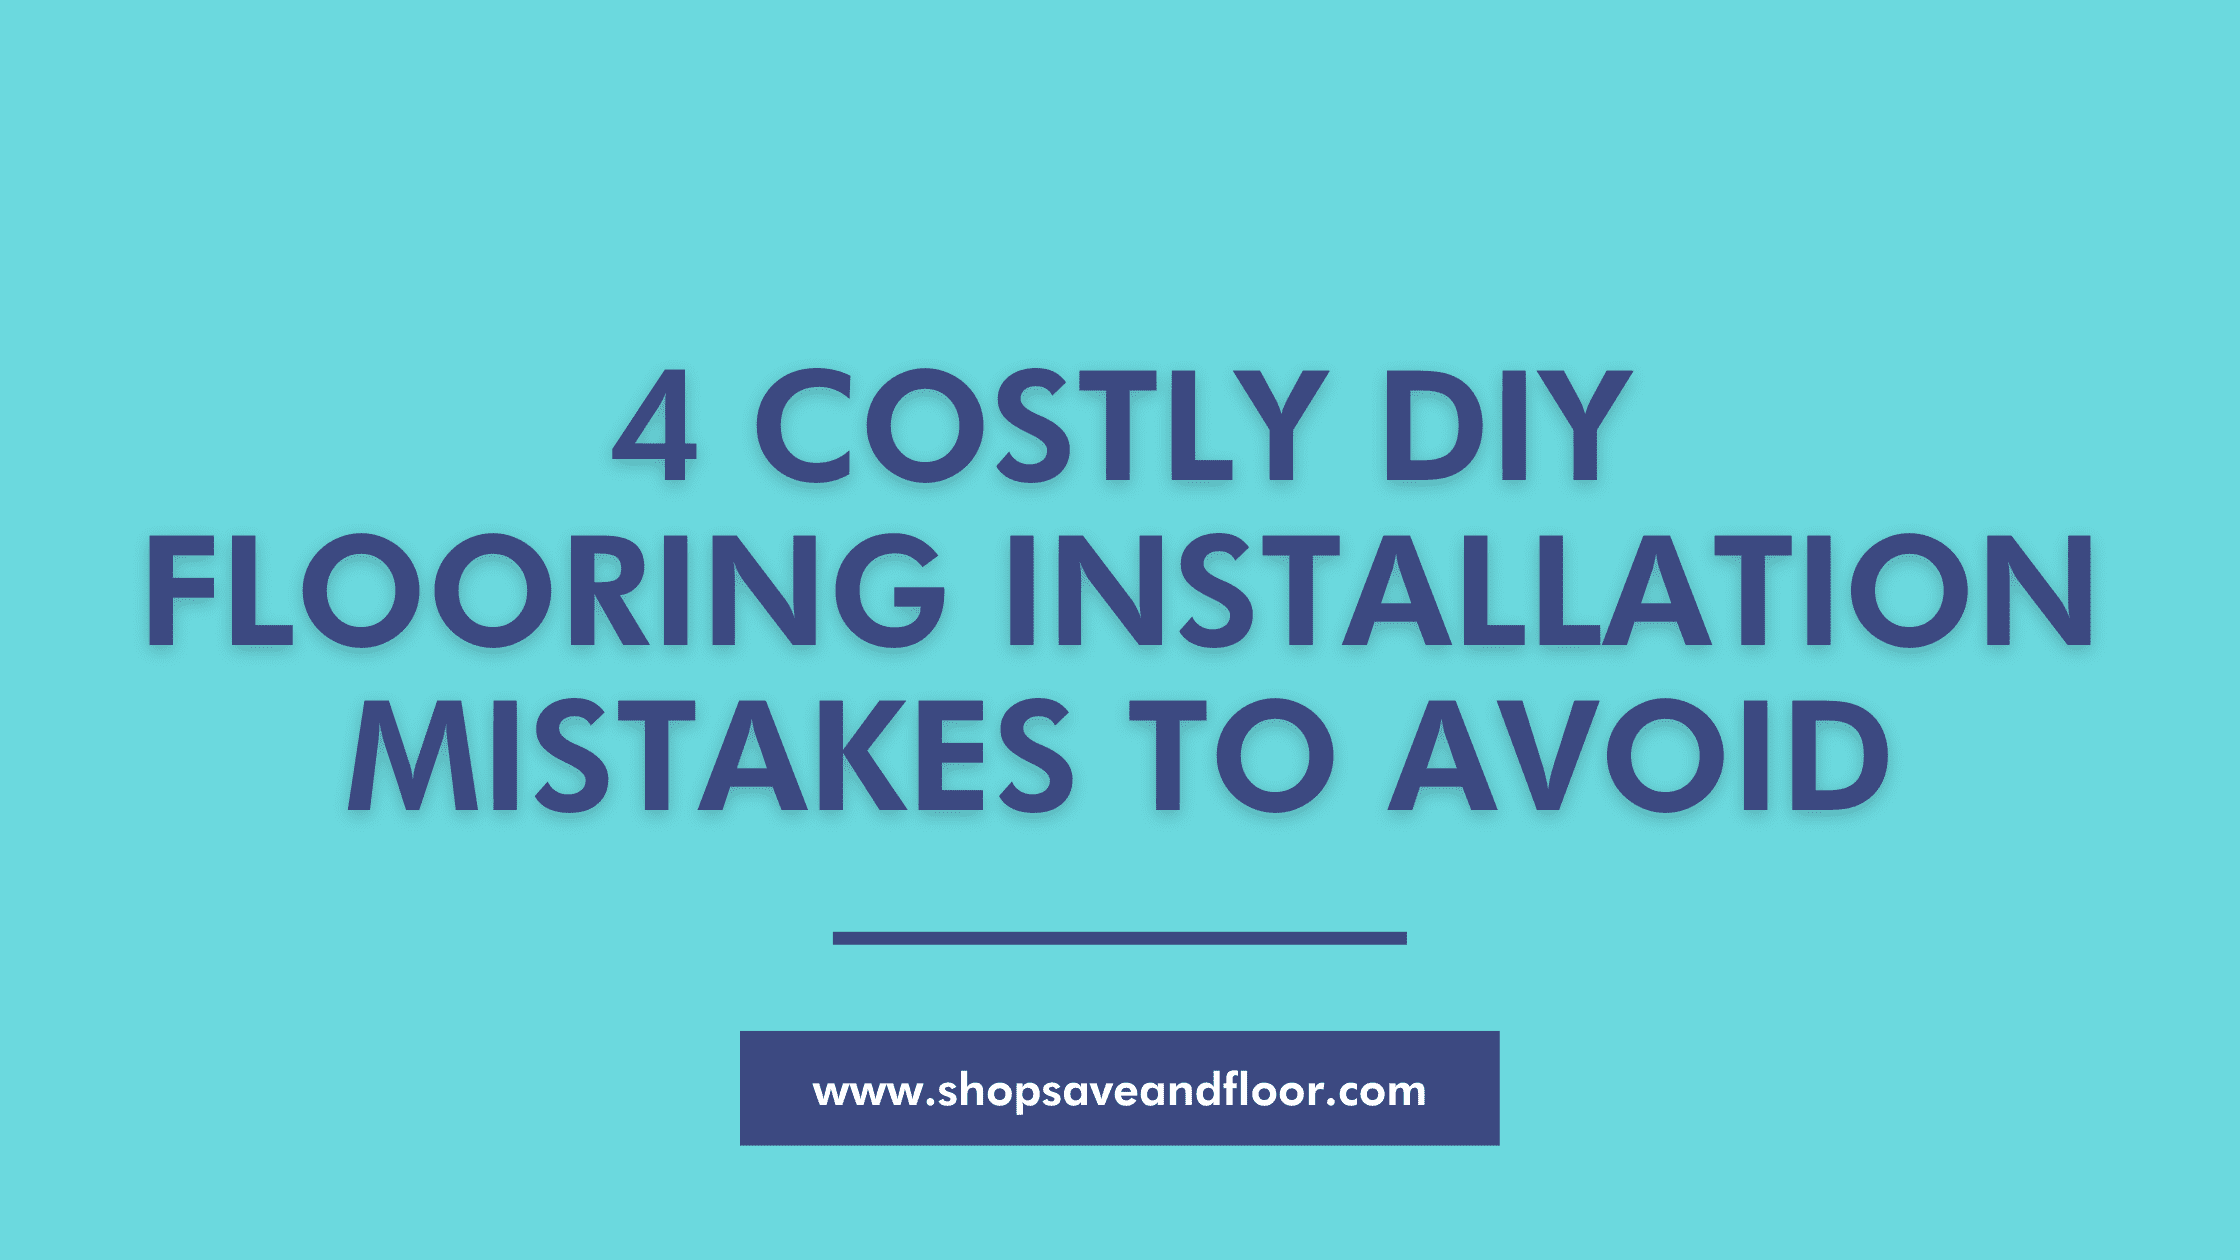 4 Costly DIY Flooring Installation Mistakes To Avoid